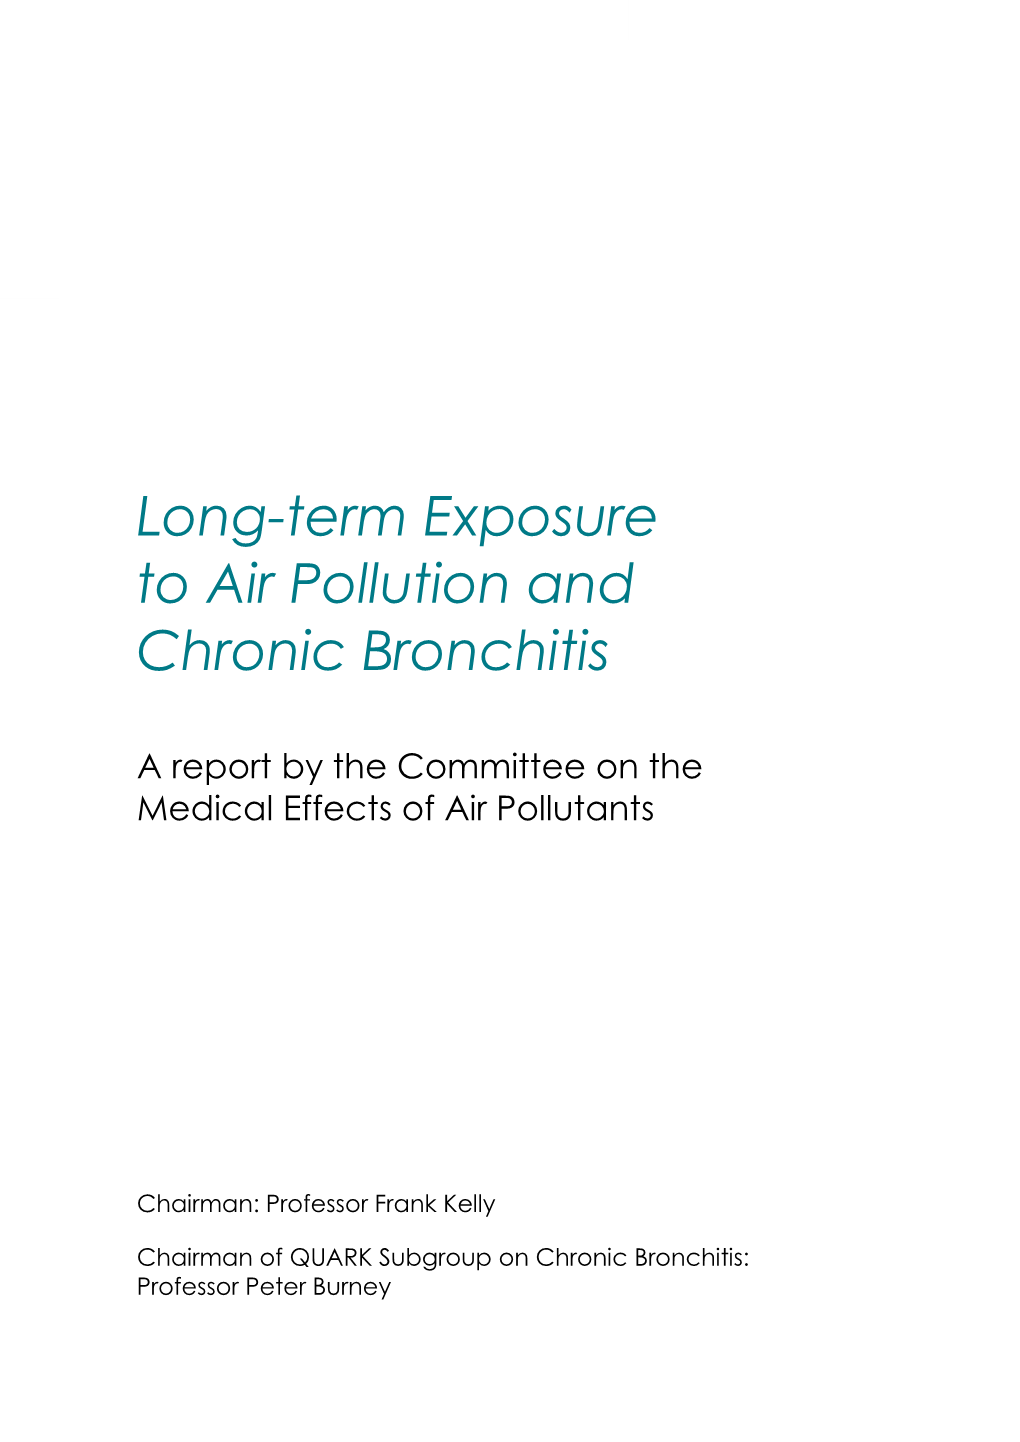 Long-Term Exposure to Air Pollution and Chronic Bronchitis